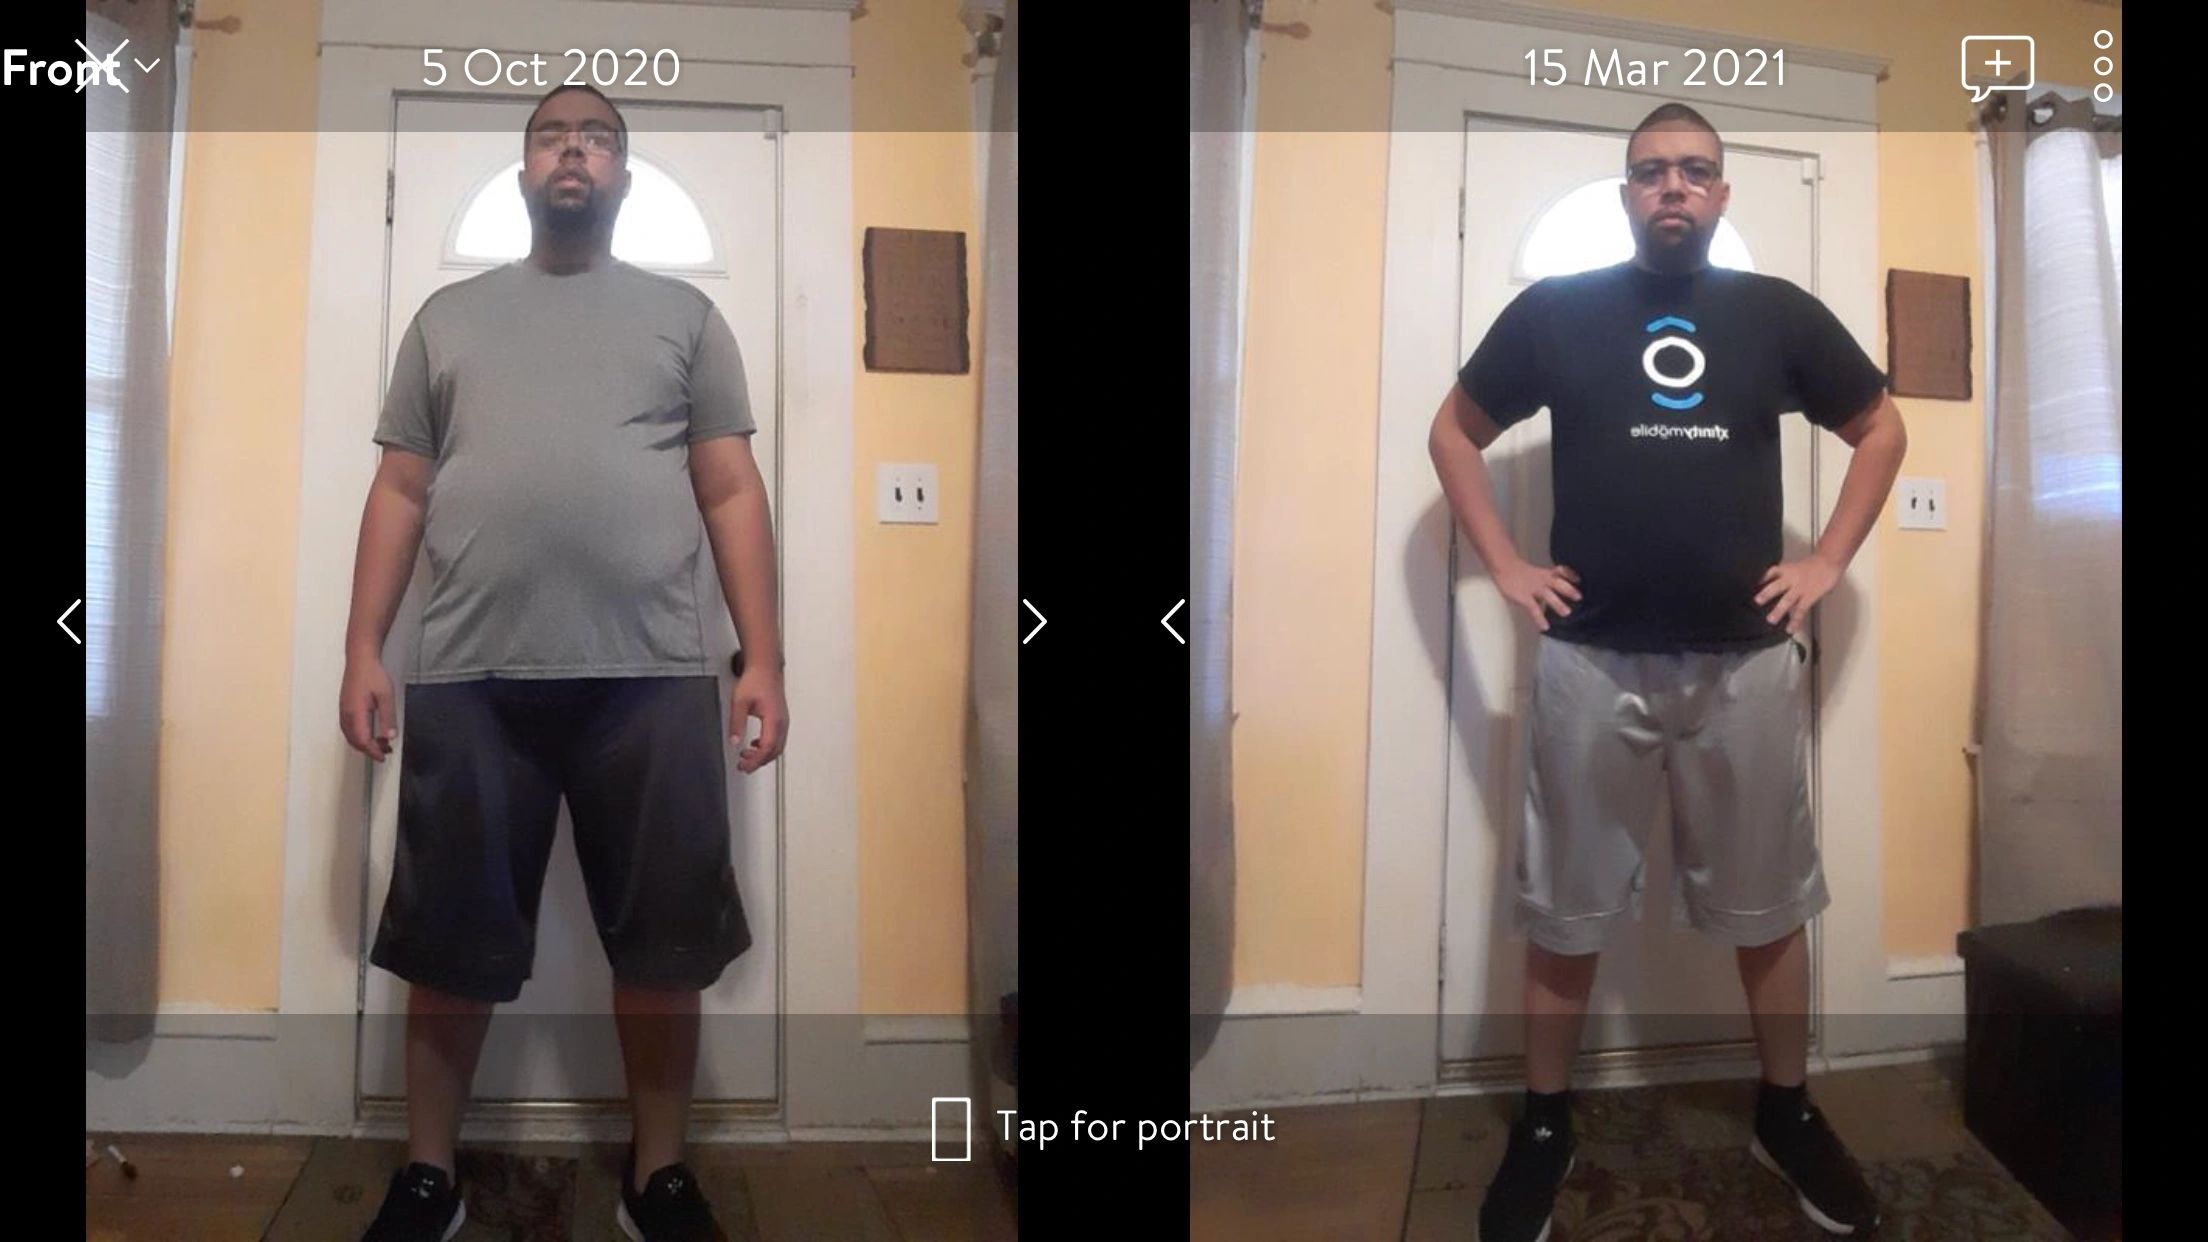 Amazing single father of two awesome kids, working from home and STILL lost 40 pounds! 